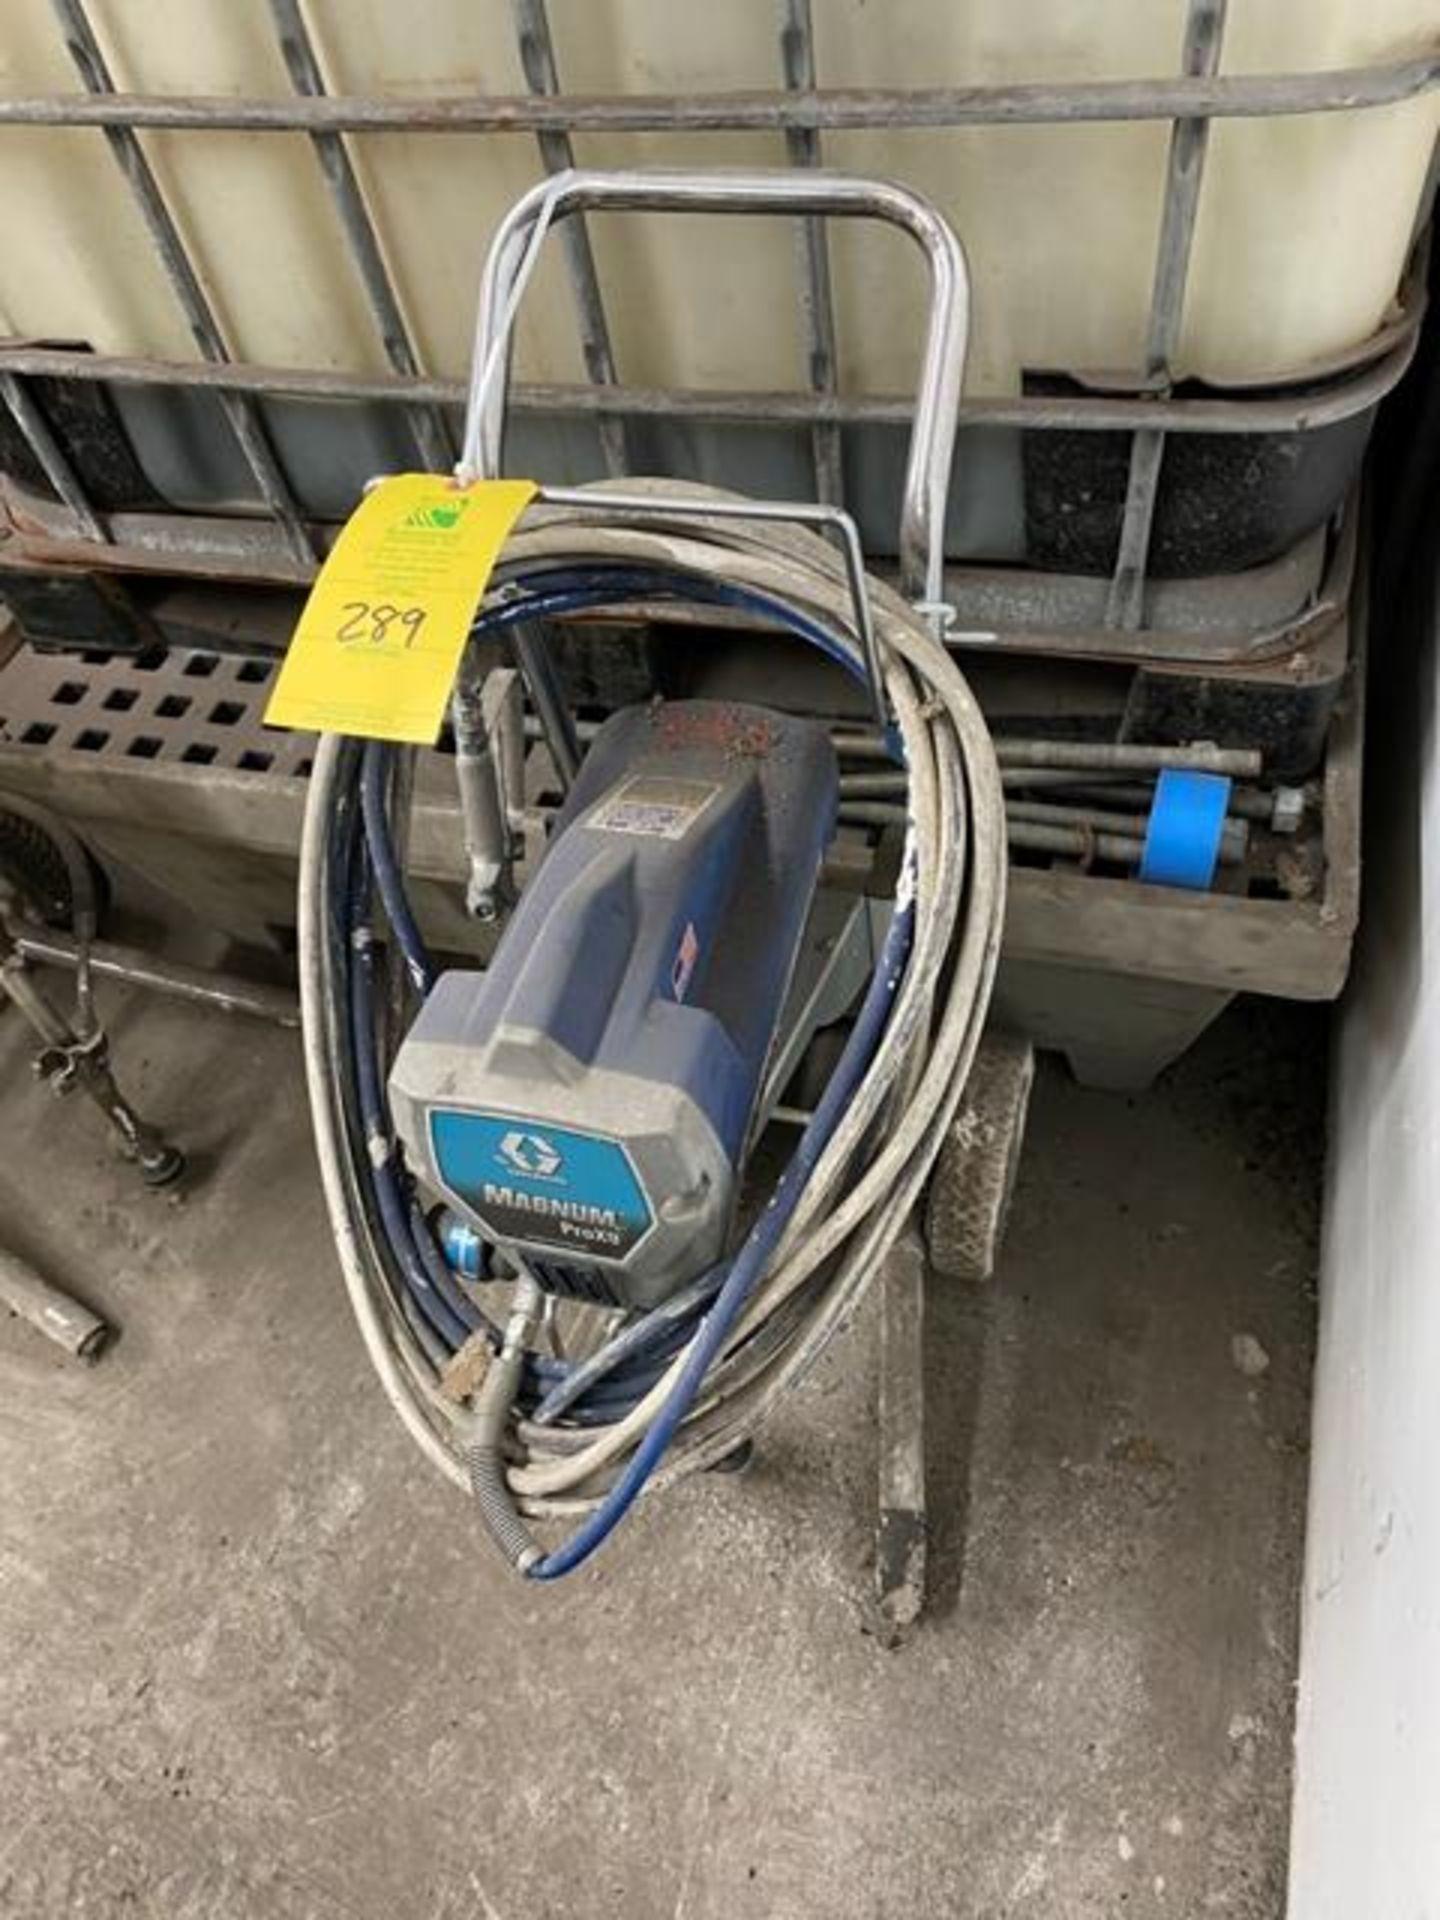 Graco Magnum Pro X9 Airless Paint Sprayer Rigging Price $25 - Image 3 of 3